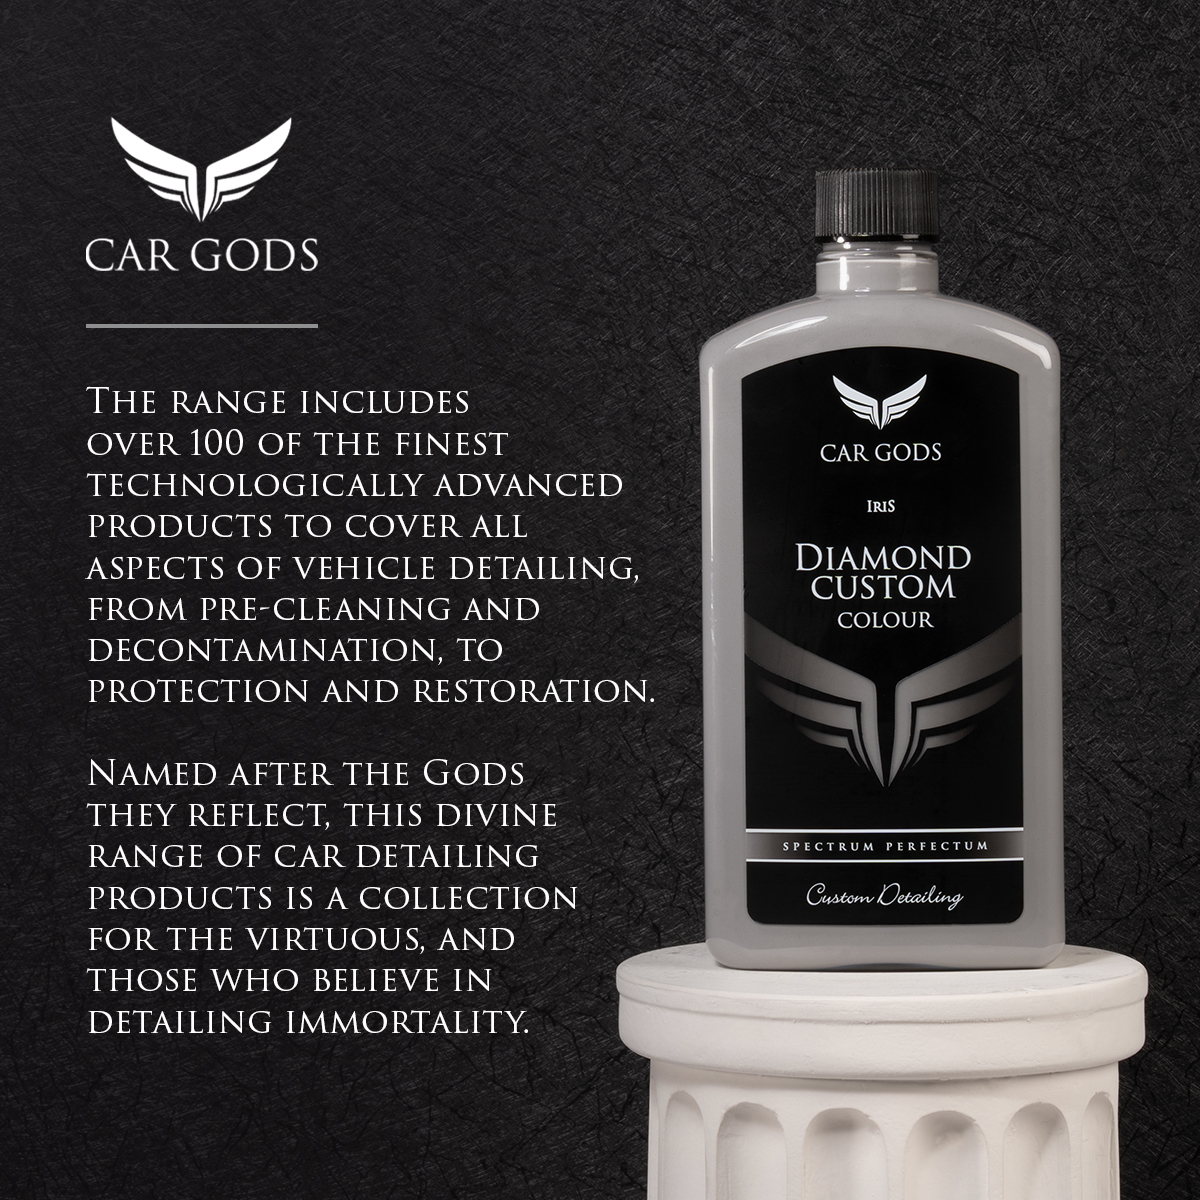 The Car Gods range includes over 100 of the finest technologically advanced products to cover all aspects of vehicle detailing, from pre-cleaning and decontamination, to protection and restoration. Named after the Gods they reflect, this divine range of car detailing products is a collection for the virtuous, and those who believe in detailing immortality.